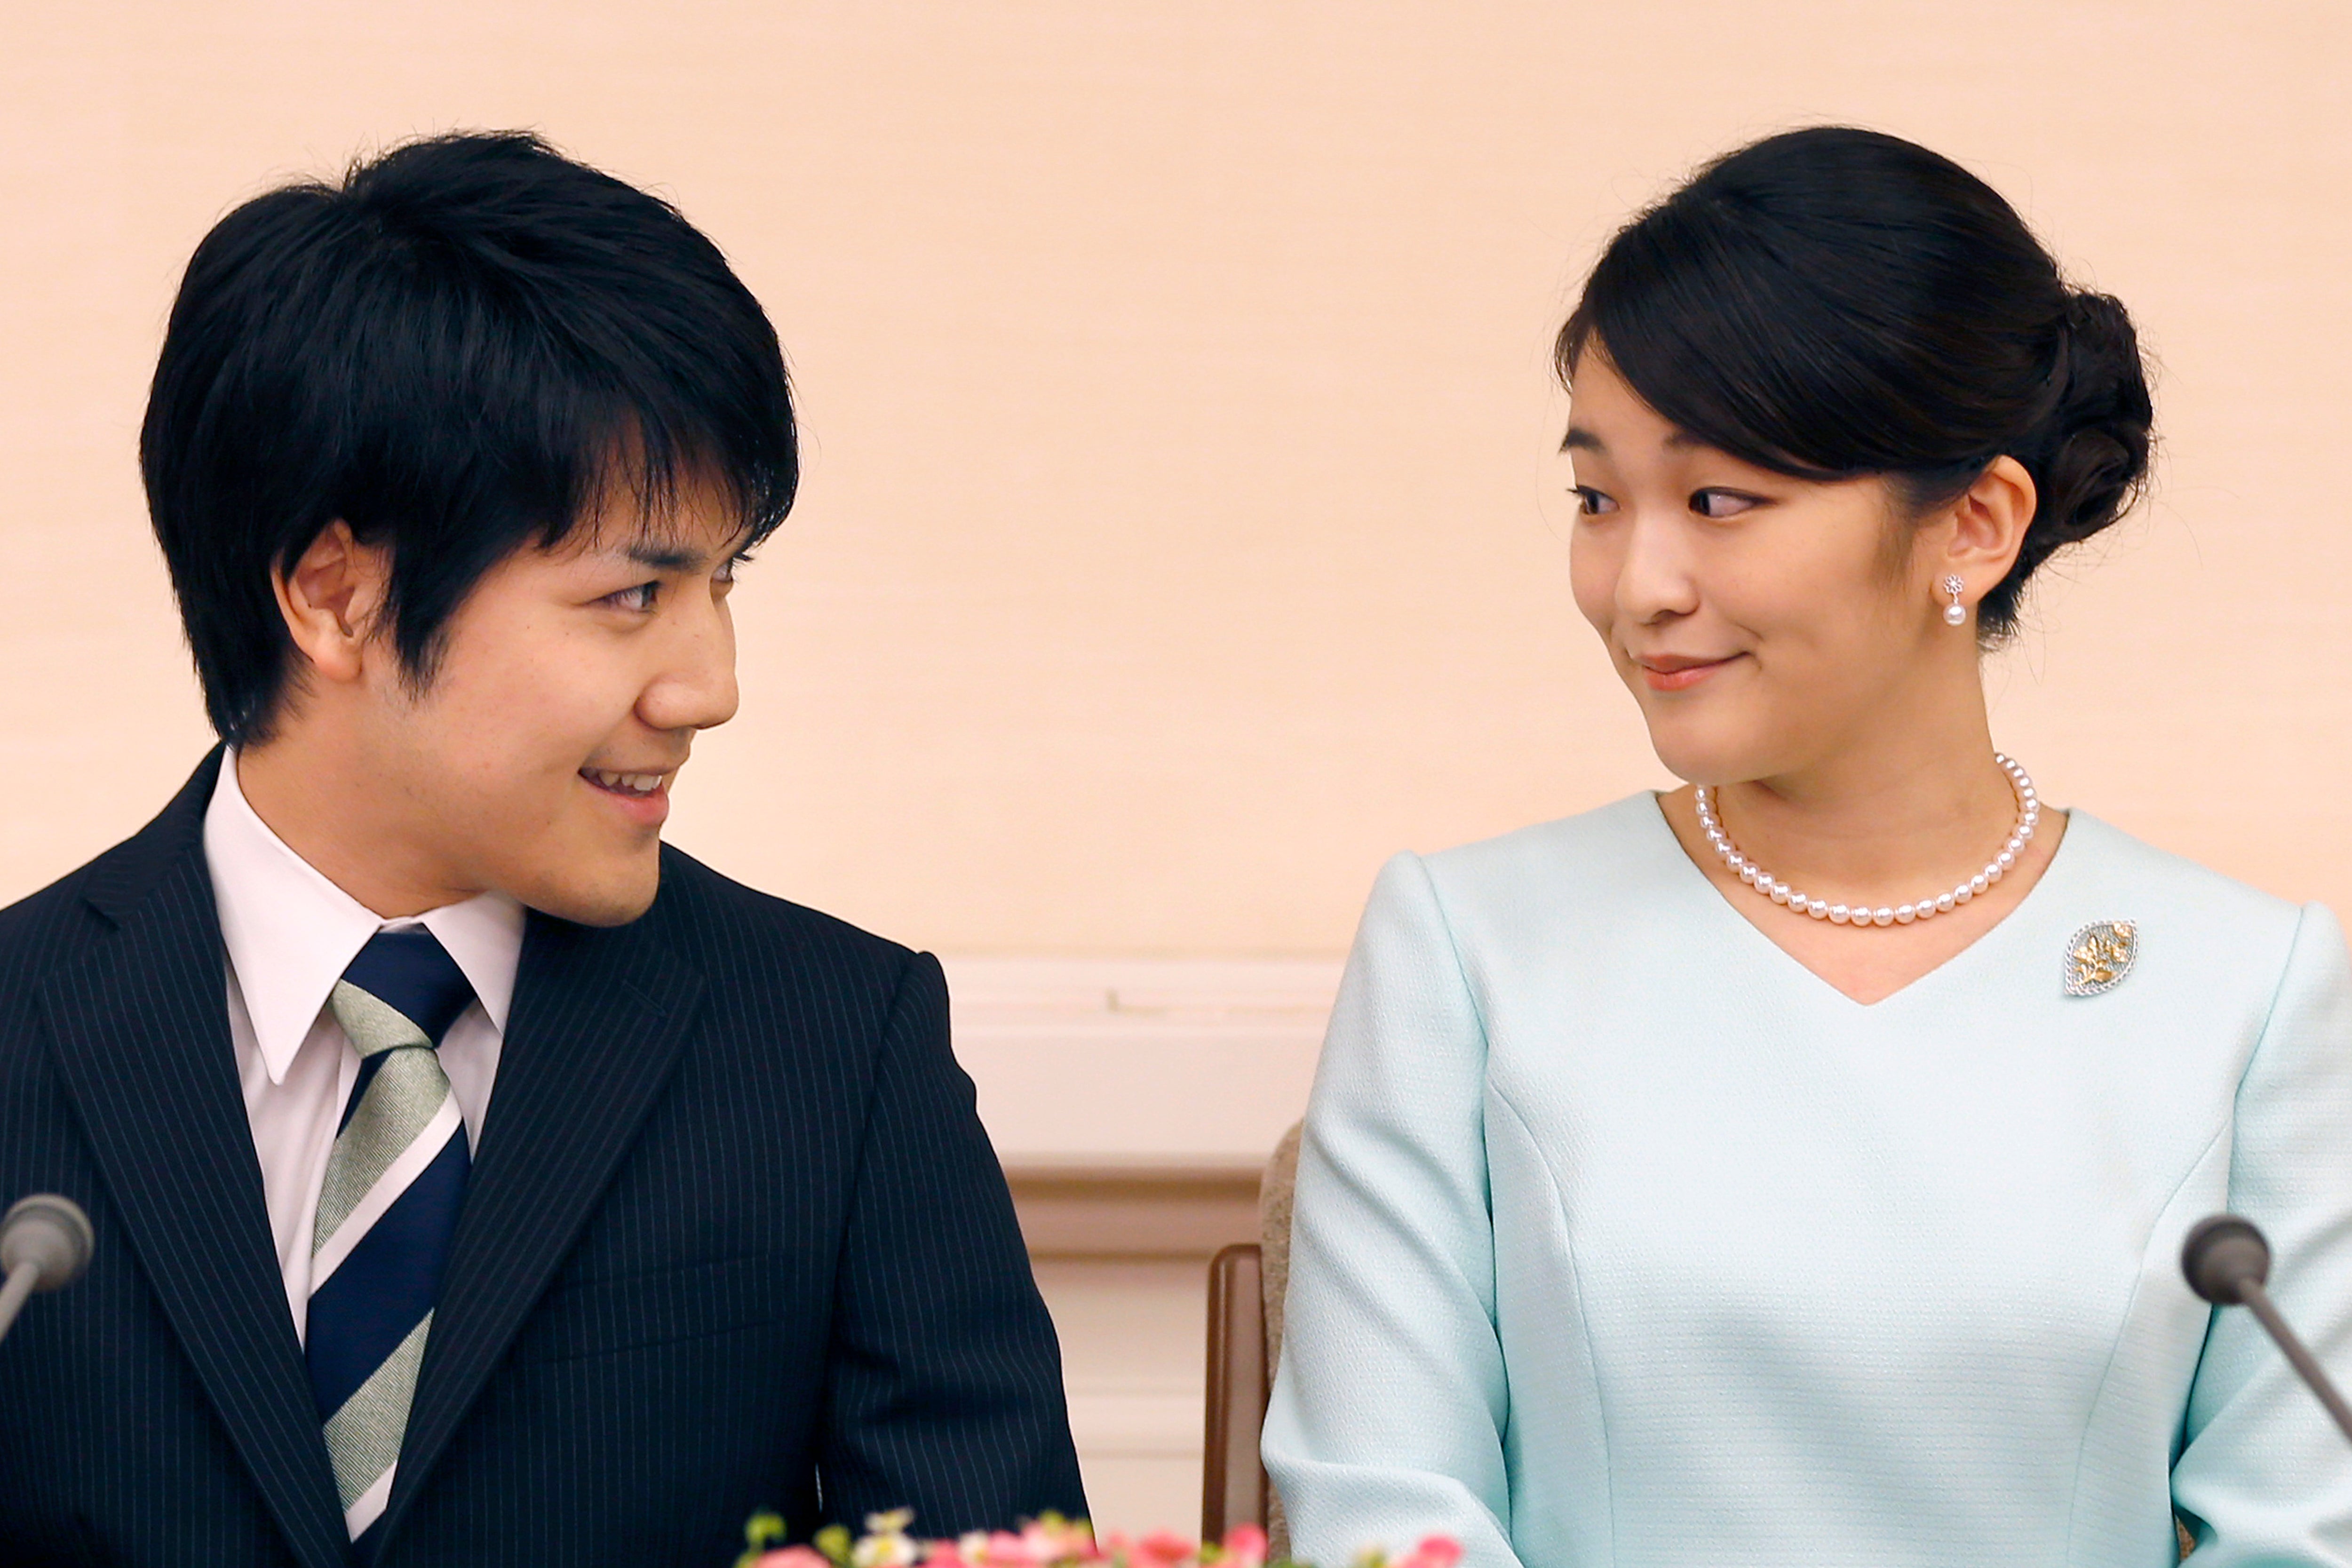 Japan's Princess Mako and her fiance Kei Komuro announced their engagement in 2017